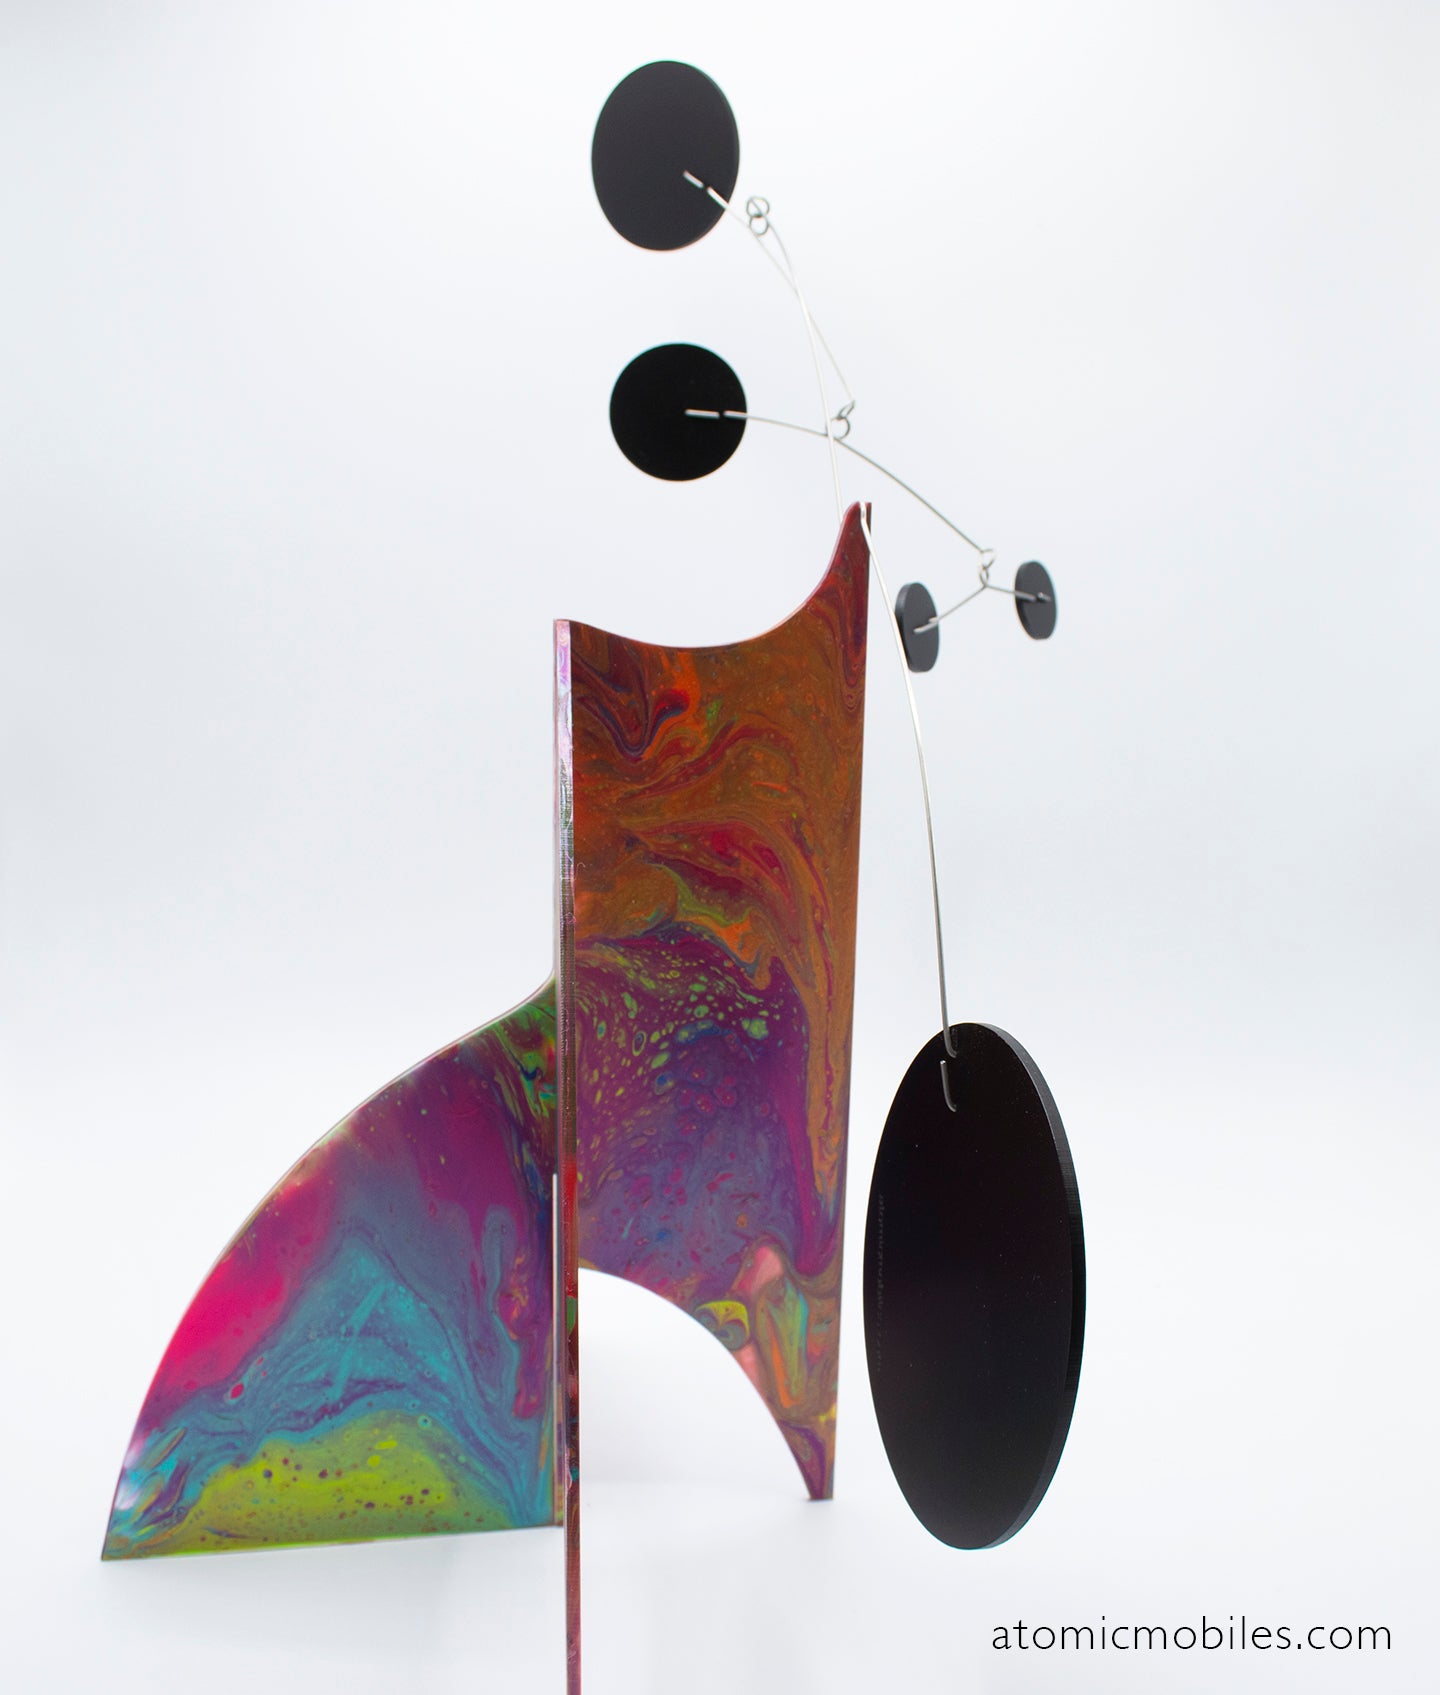 Eloquent Hand Painted Stabile Sculpture #2 - Atomic Mobiles Fine Art